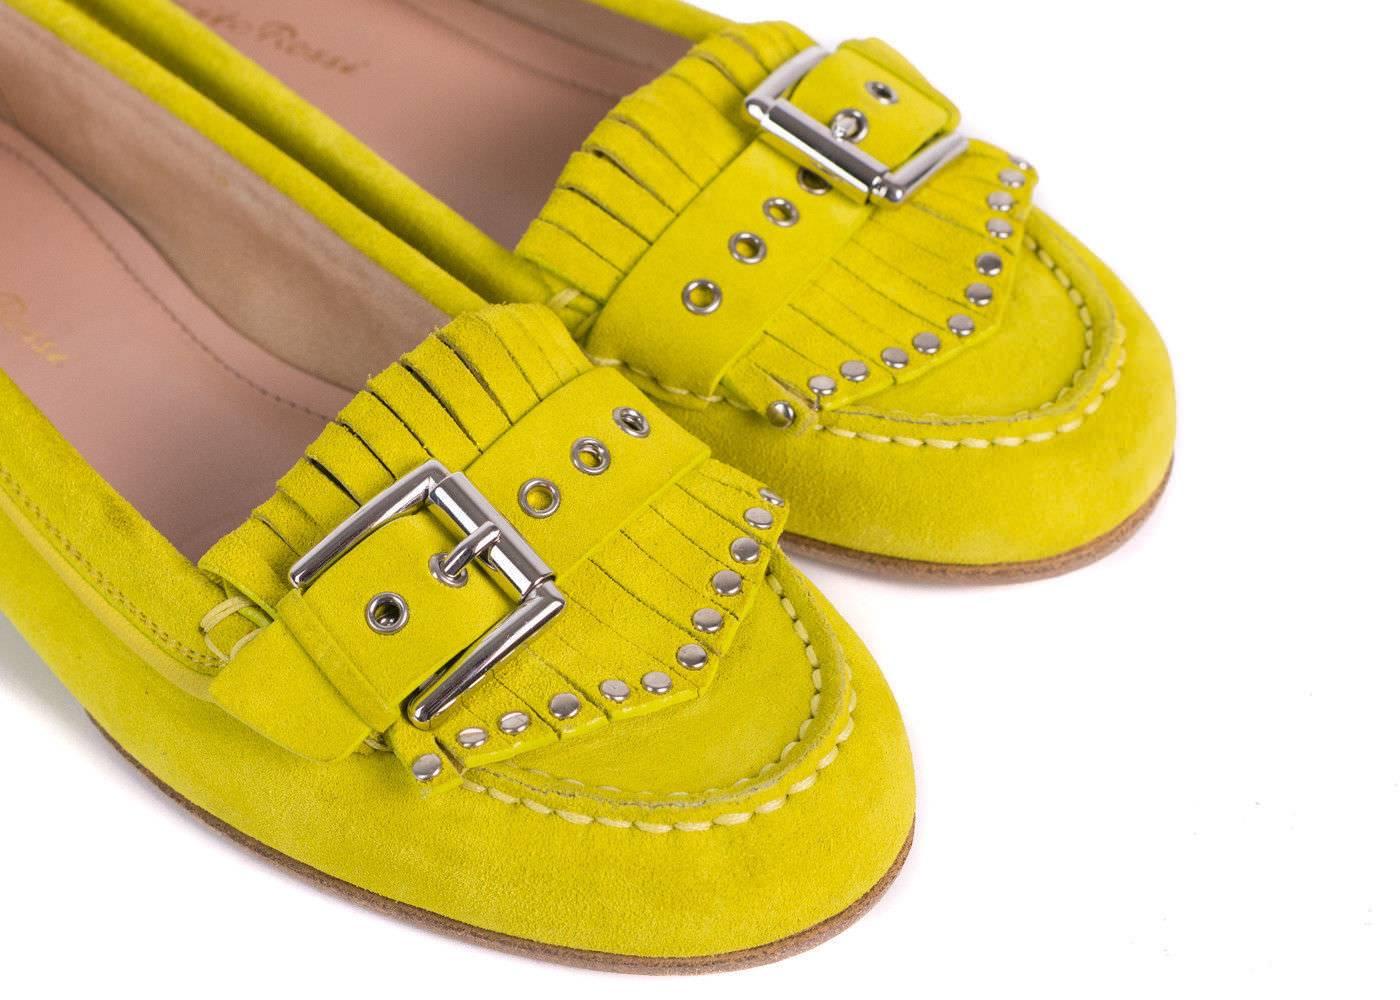 Gianvito Rossi continues to bridge Italian glamour and high-end craftsmanship with a modern aesthetic for your everyday wear. The 'Gianvito Rossi Chartreuse Green Suede Studded Buckle Moccasin' is offered in a bright playful color features a unique